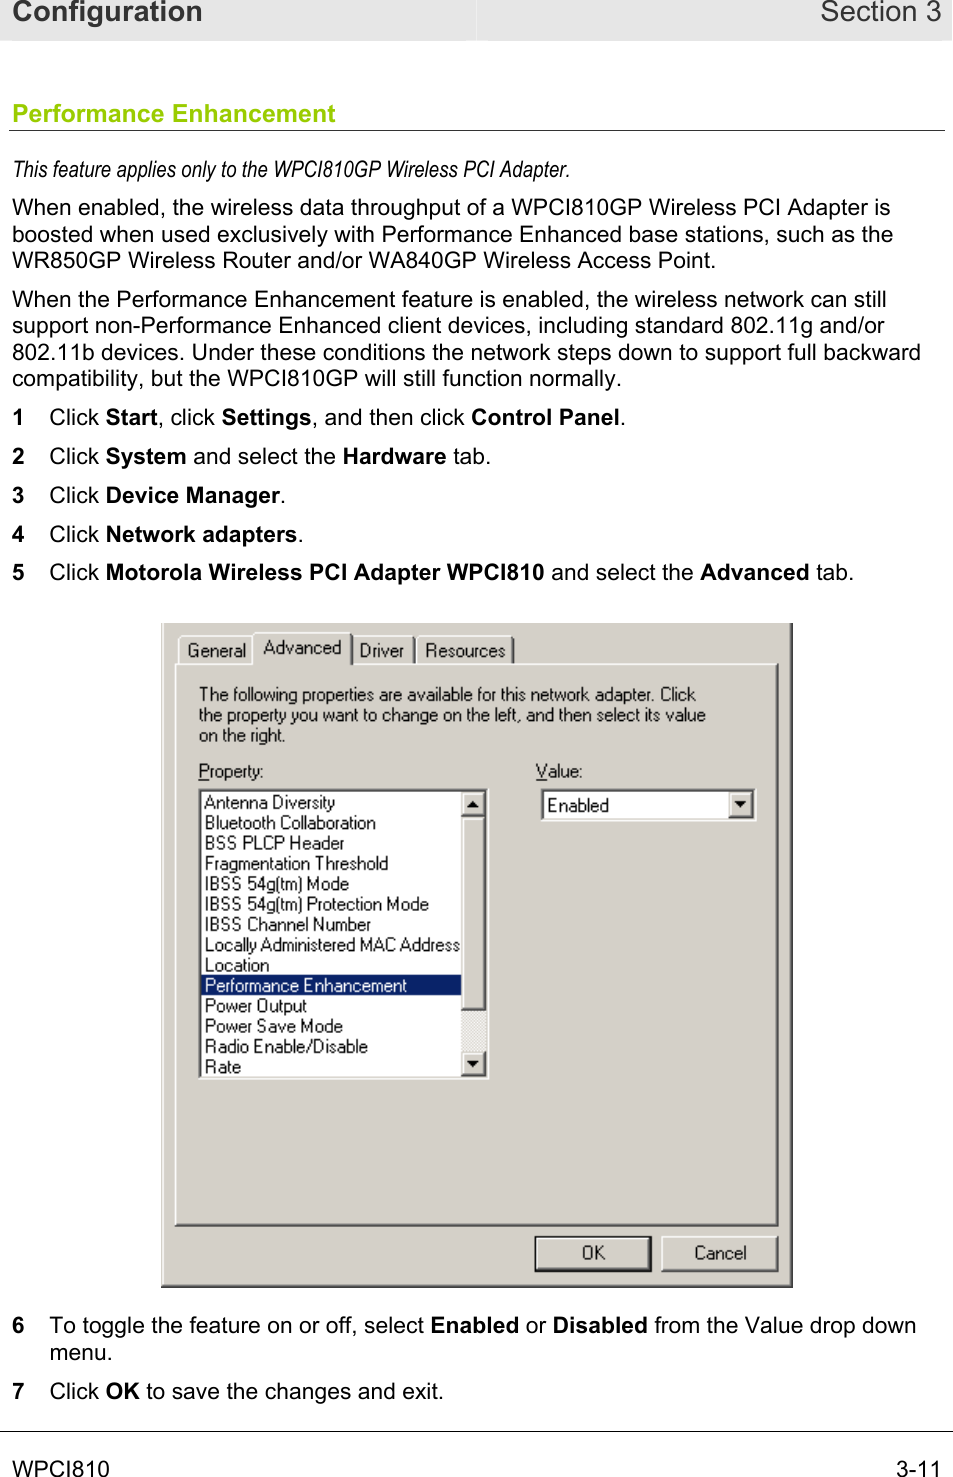 Configuration Section 3 WPCI810  3-11 Performance Enhancement This feature applies only to the WPCI810GP Wireless PCI Adapter.  When enabled, the wireless data throughput of a WPCI810GP Wireless PCI Adapter is boosted when used exclusively with Performance Enhanced base stations, such as the WR850GP Wireless Router and/or WA840GP Wireless Access Point.  When the Performance Enhancement feature is enabled, the wireless network can still support non-Performance Enhanced client devices, including standard 802.11g and/or 802.11b devices. Under these conditions the network steps down to support full backward compatibility, but the WPCI810GP will still function normally. 1  Click Start, click Settings, and then click Control Panel.  2  Click System and select the Hardware tab.  3  Click Device Manager.  4  Click Network adapters.  5  Click Motorola Wireless PCI Adapter WPCI810 and select the Advanced tab.   6  To toggle the feature on or off, select Enabled or Disabled from the Value drop down menu. 7  Click OK to save the changes and exit. 